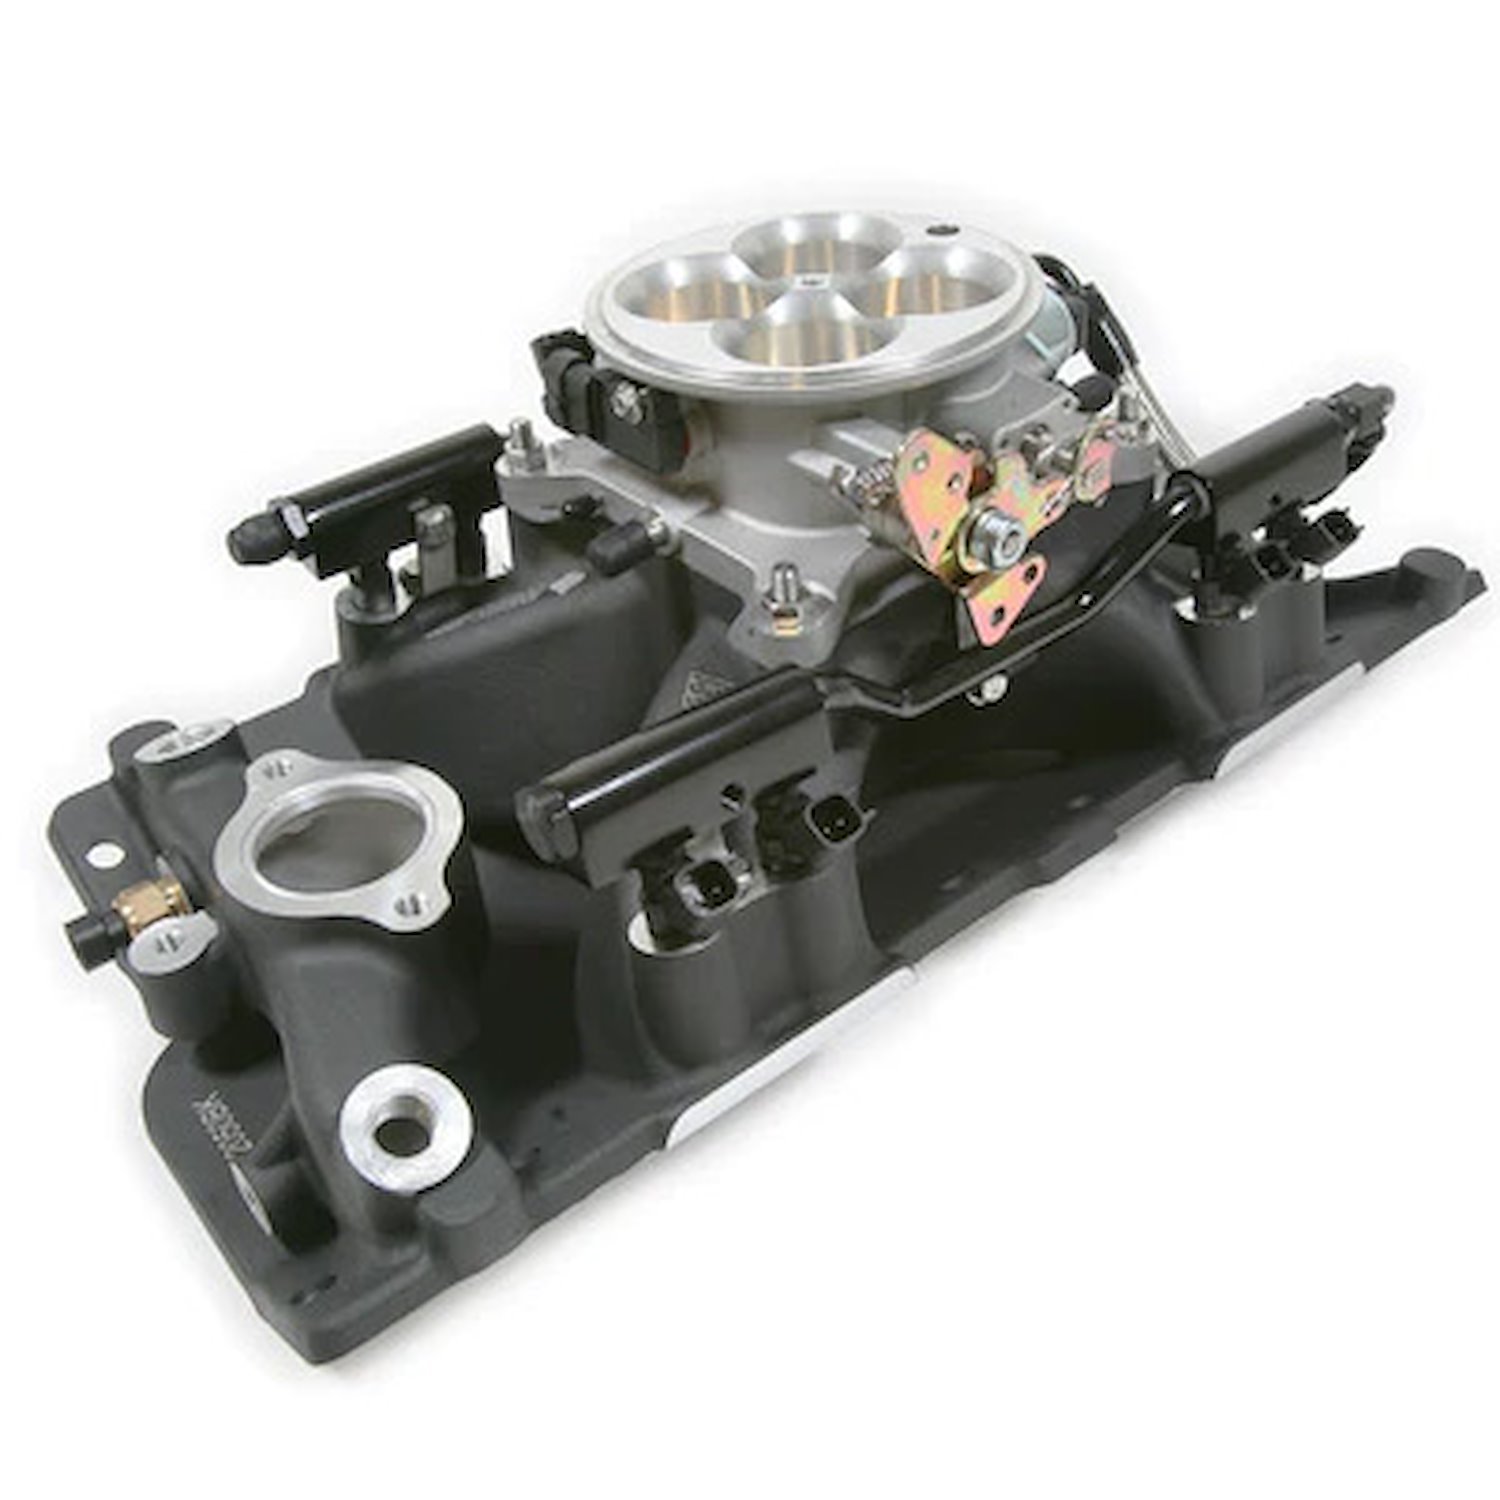 AS2015P-SBF-B2080 The Joker EFI Standalone Management System, Small Block Ford, with Black AM2080 Intake Manifold